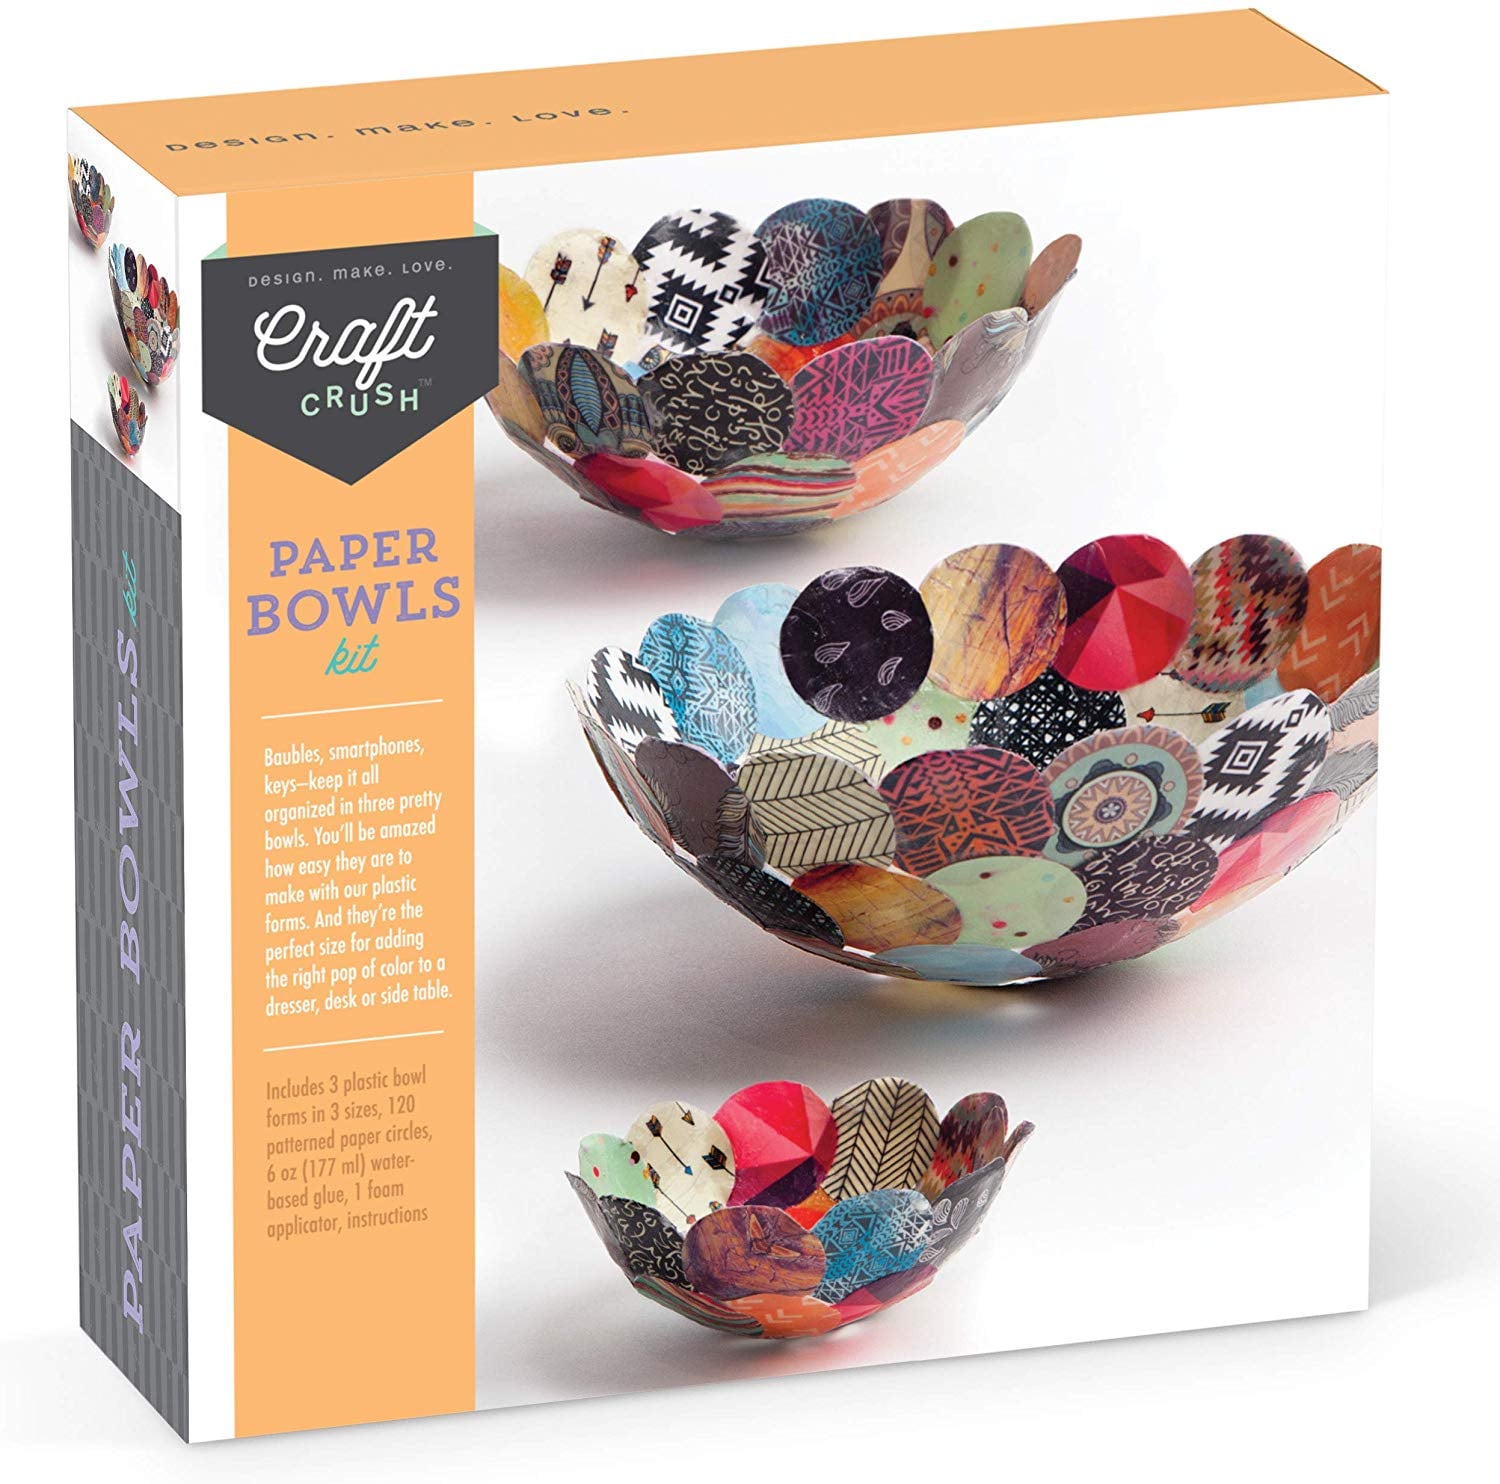 5 Relaxing Arts and Craft Kits for Adults